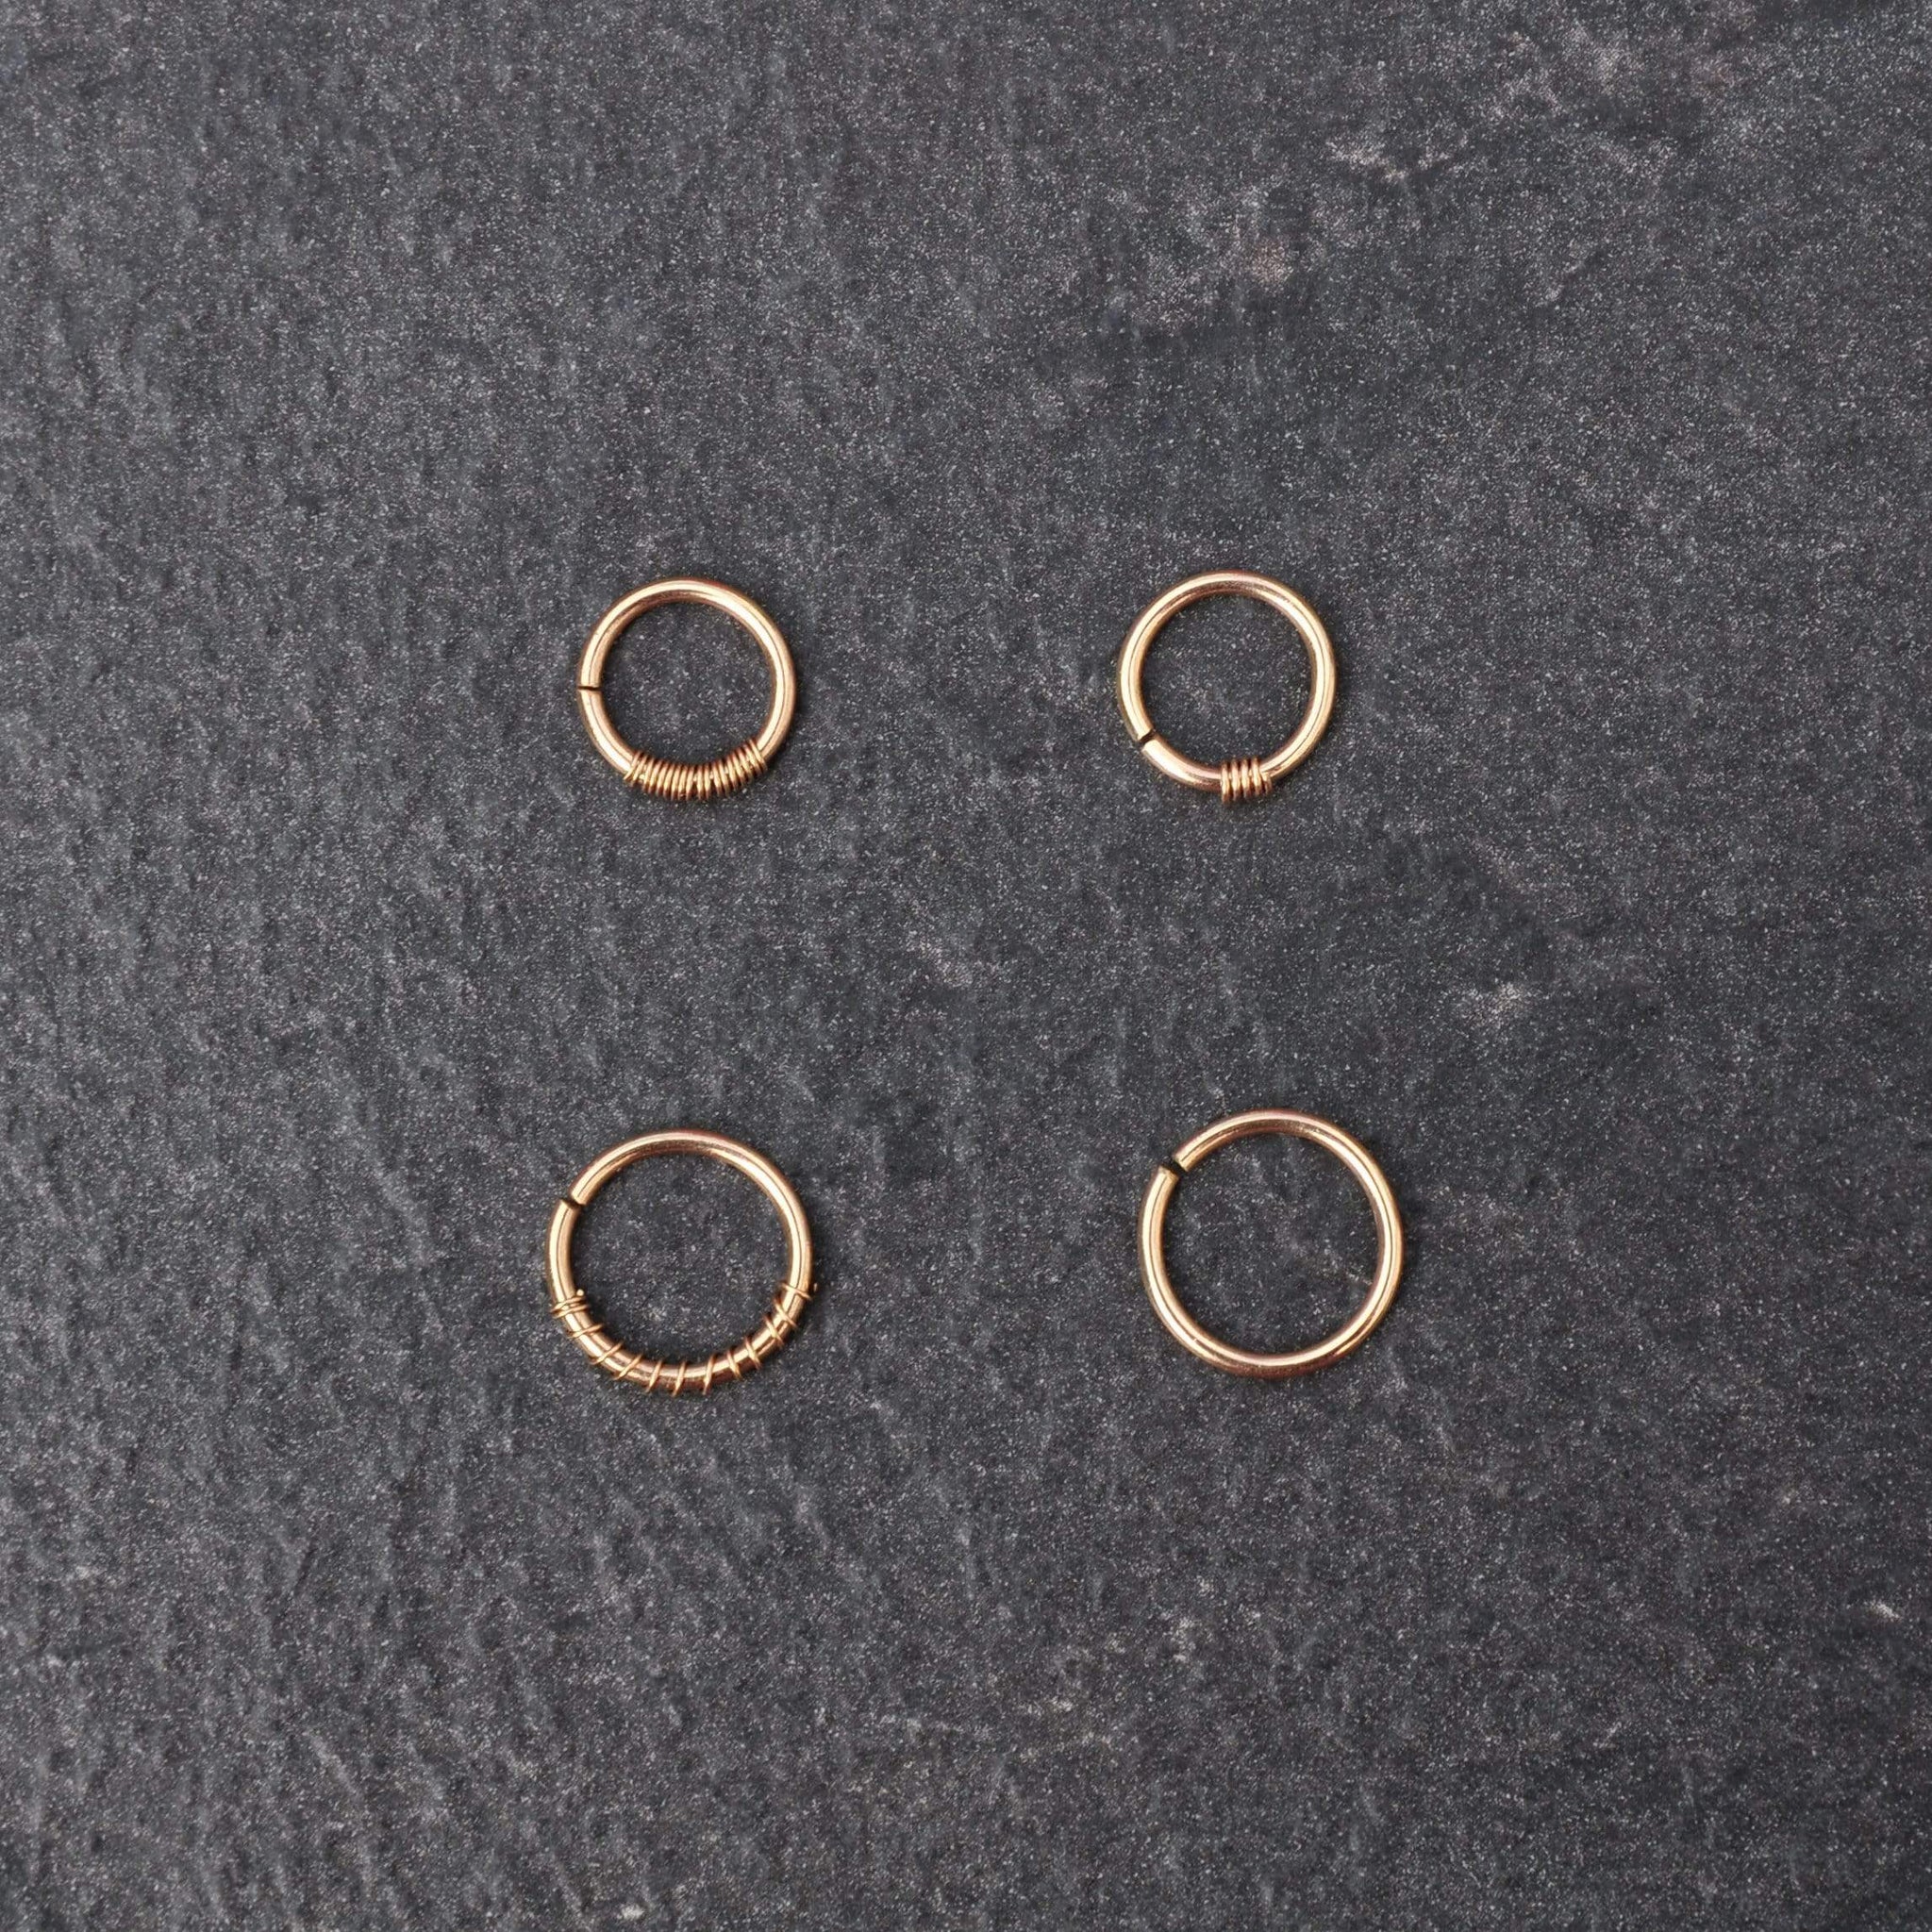 Amazon.com: 16 Gauge Nose Ring Piercing Septum Jewelry 14k Gold Filled  Customizable Size Material Hypoallergenic Seamless Hoop : Handmade Products